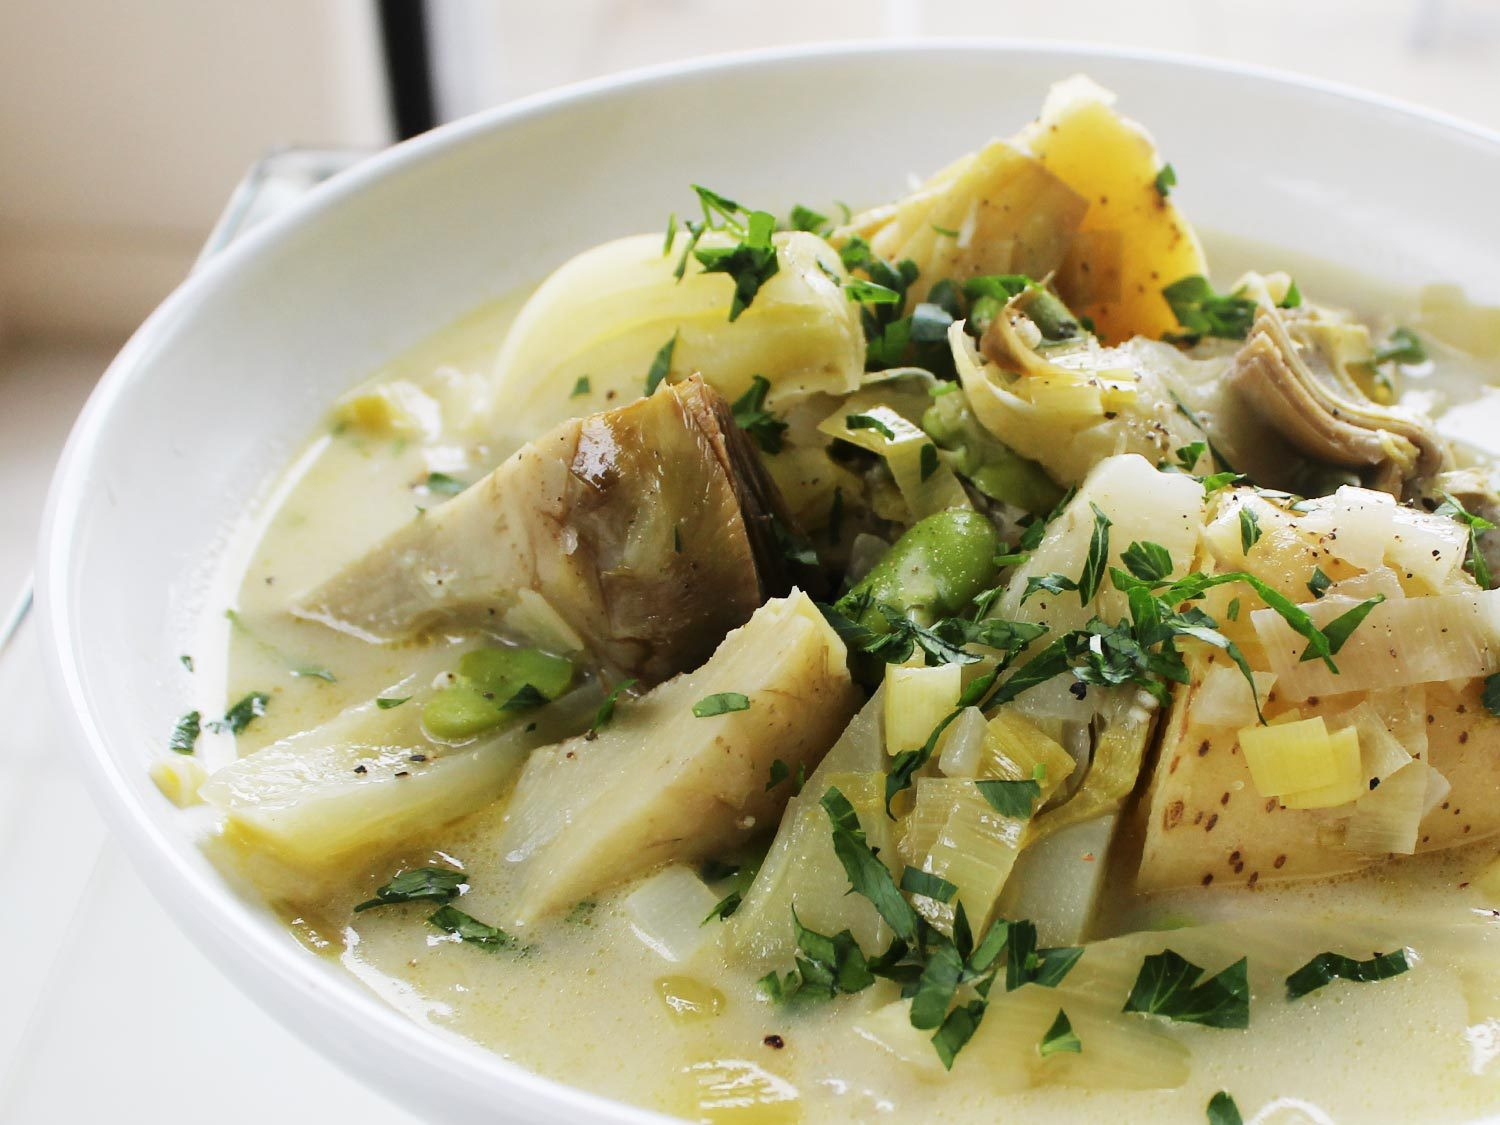 Leeks Recipes Vegetarian
 Braised Artichokes With Leeks and Peas From The New